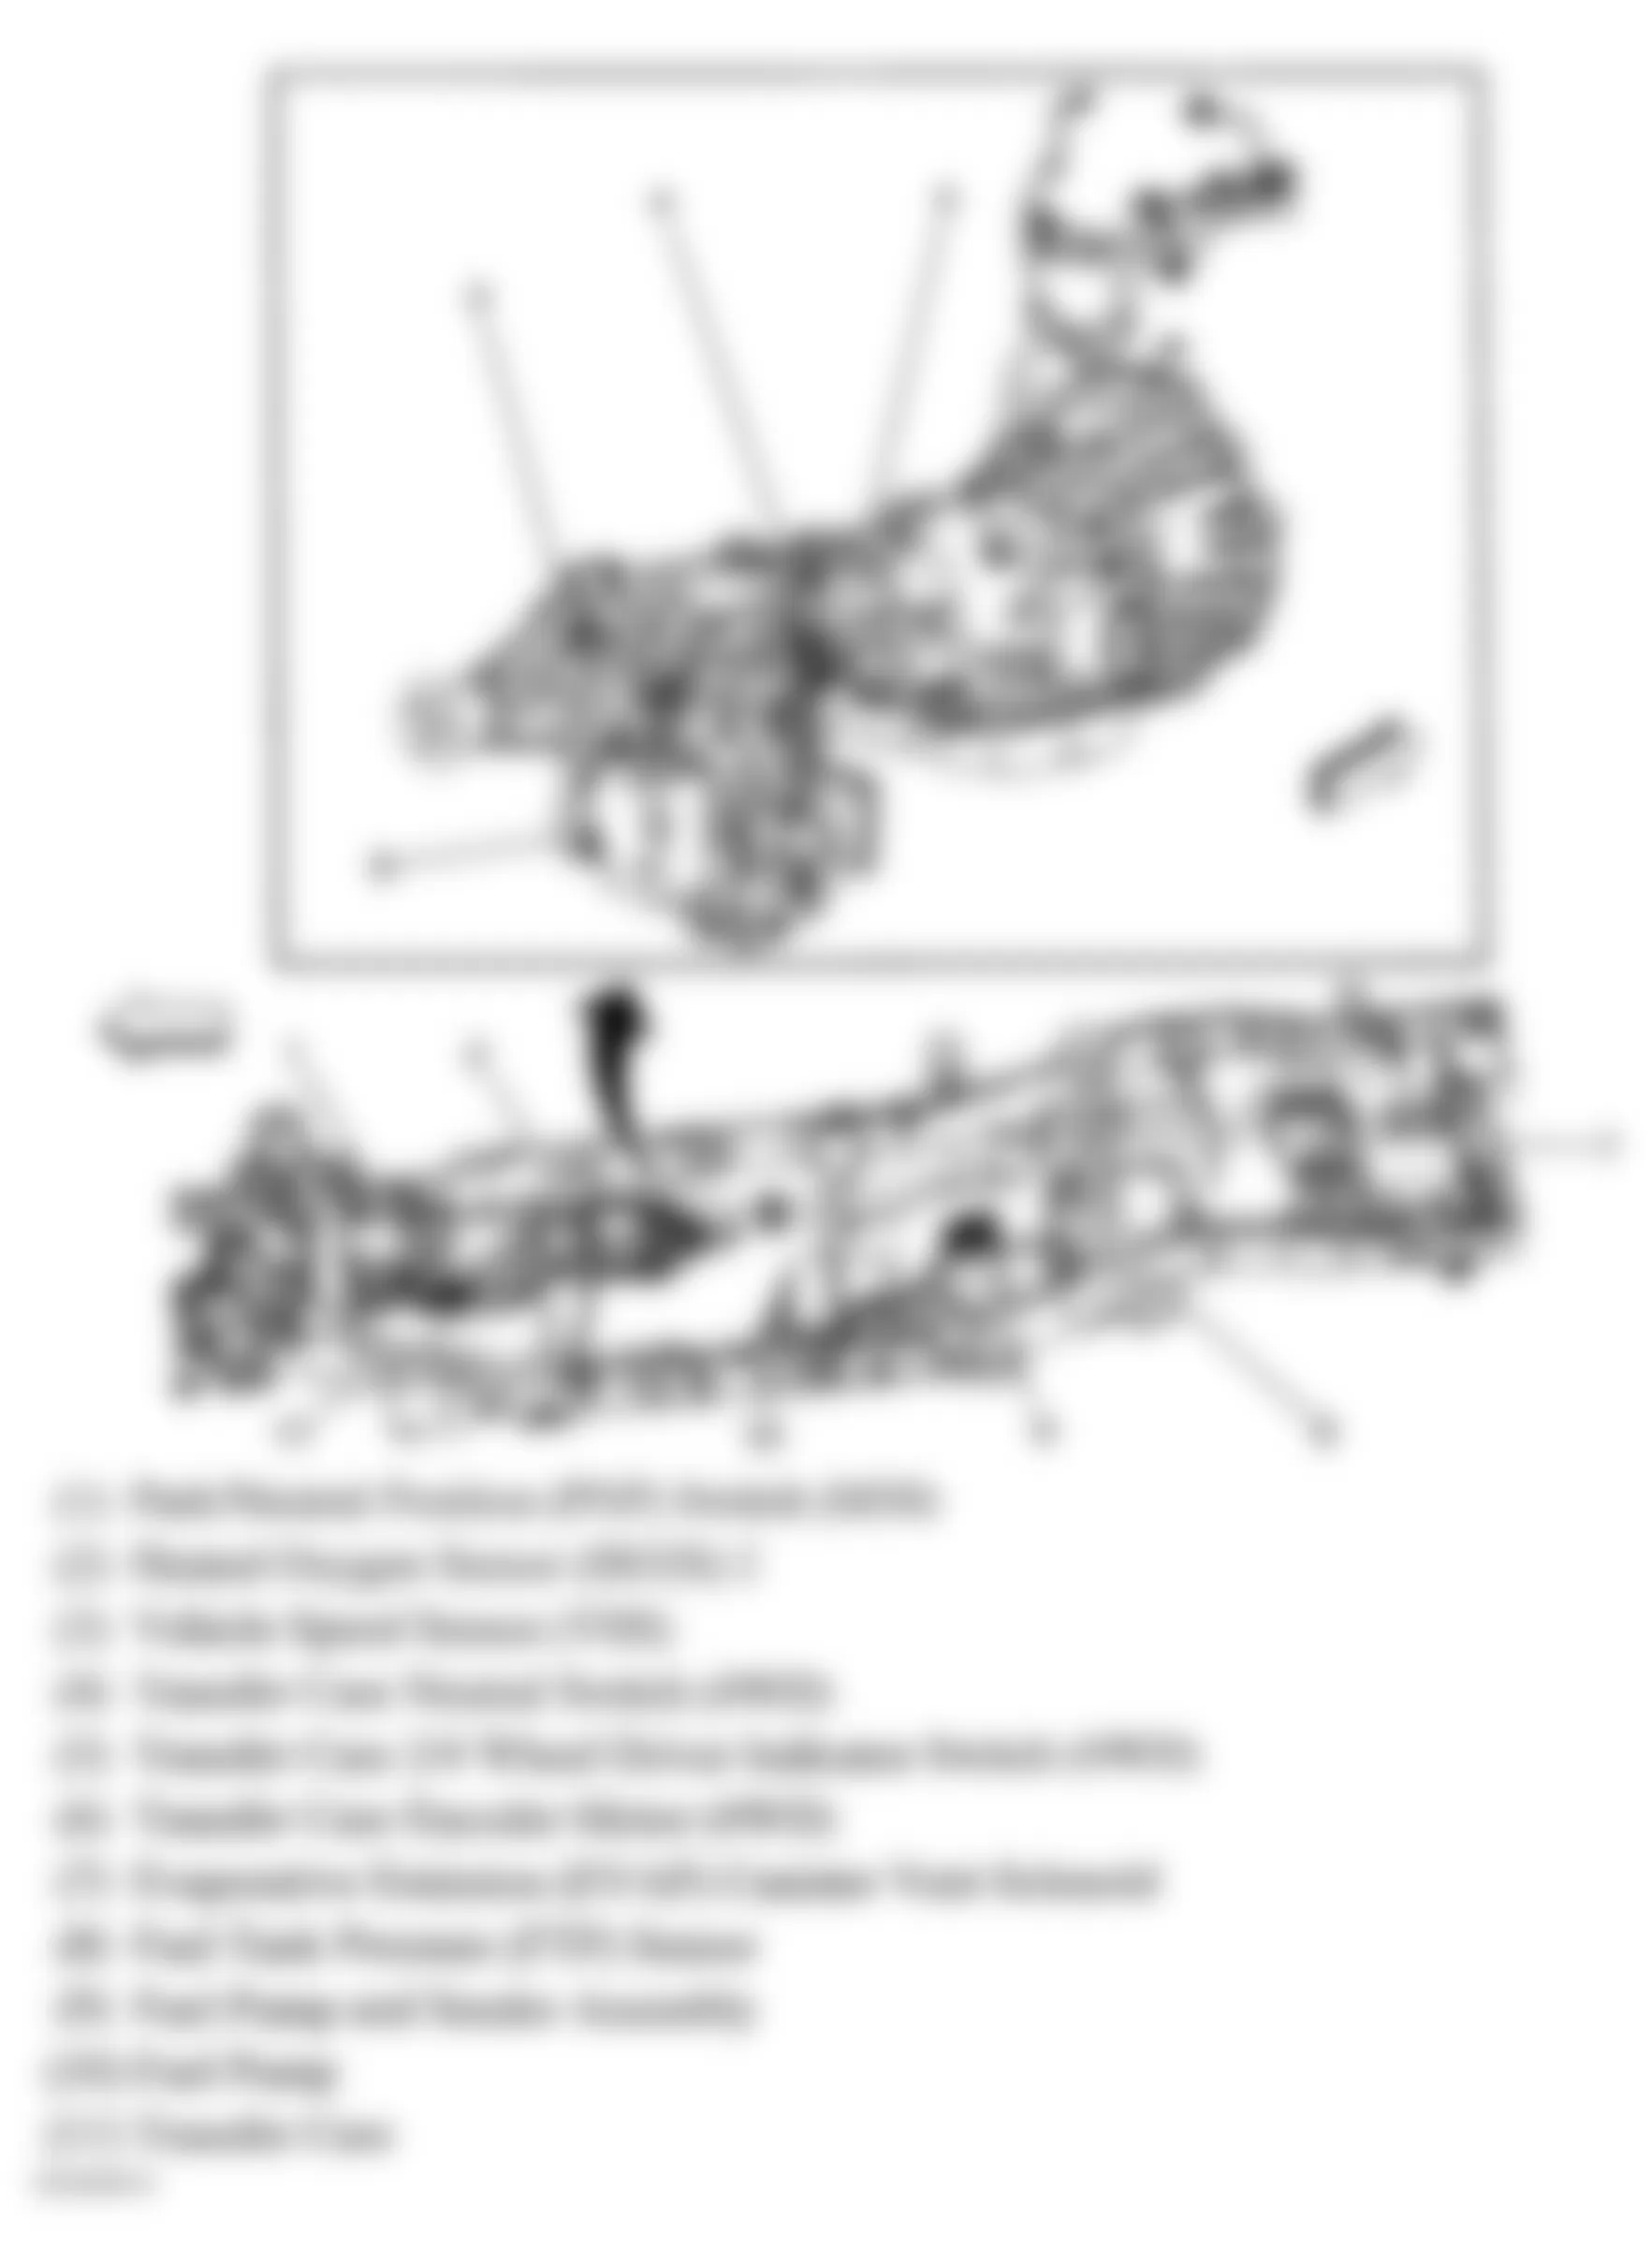 Isuzu i-290 LS 2007 - Component Locations -  Chassis & Right Side Of Transfer Case